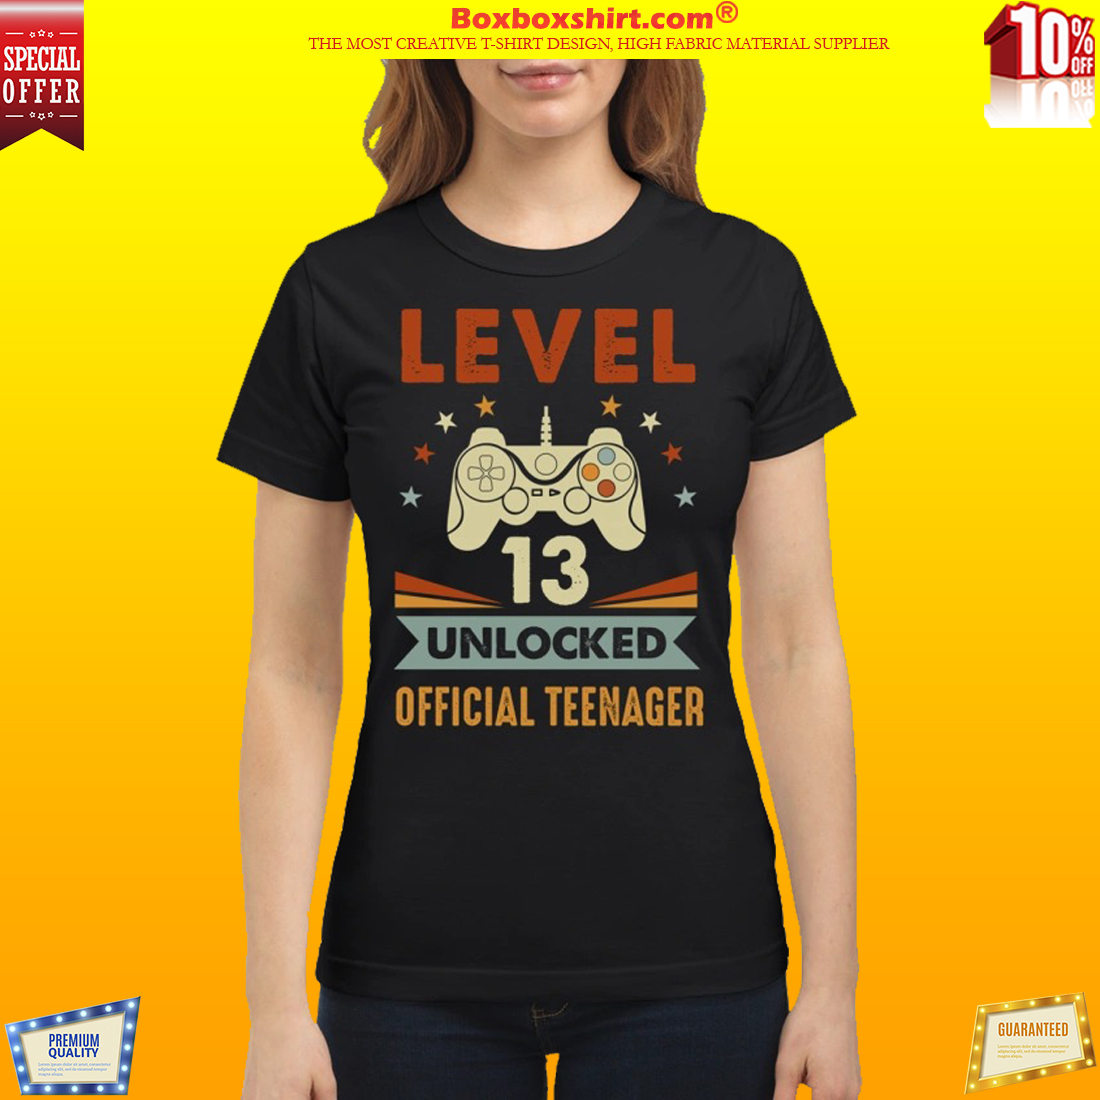 Level 13 unlocked official teenager classic shirt